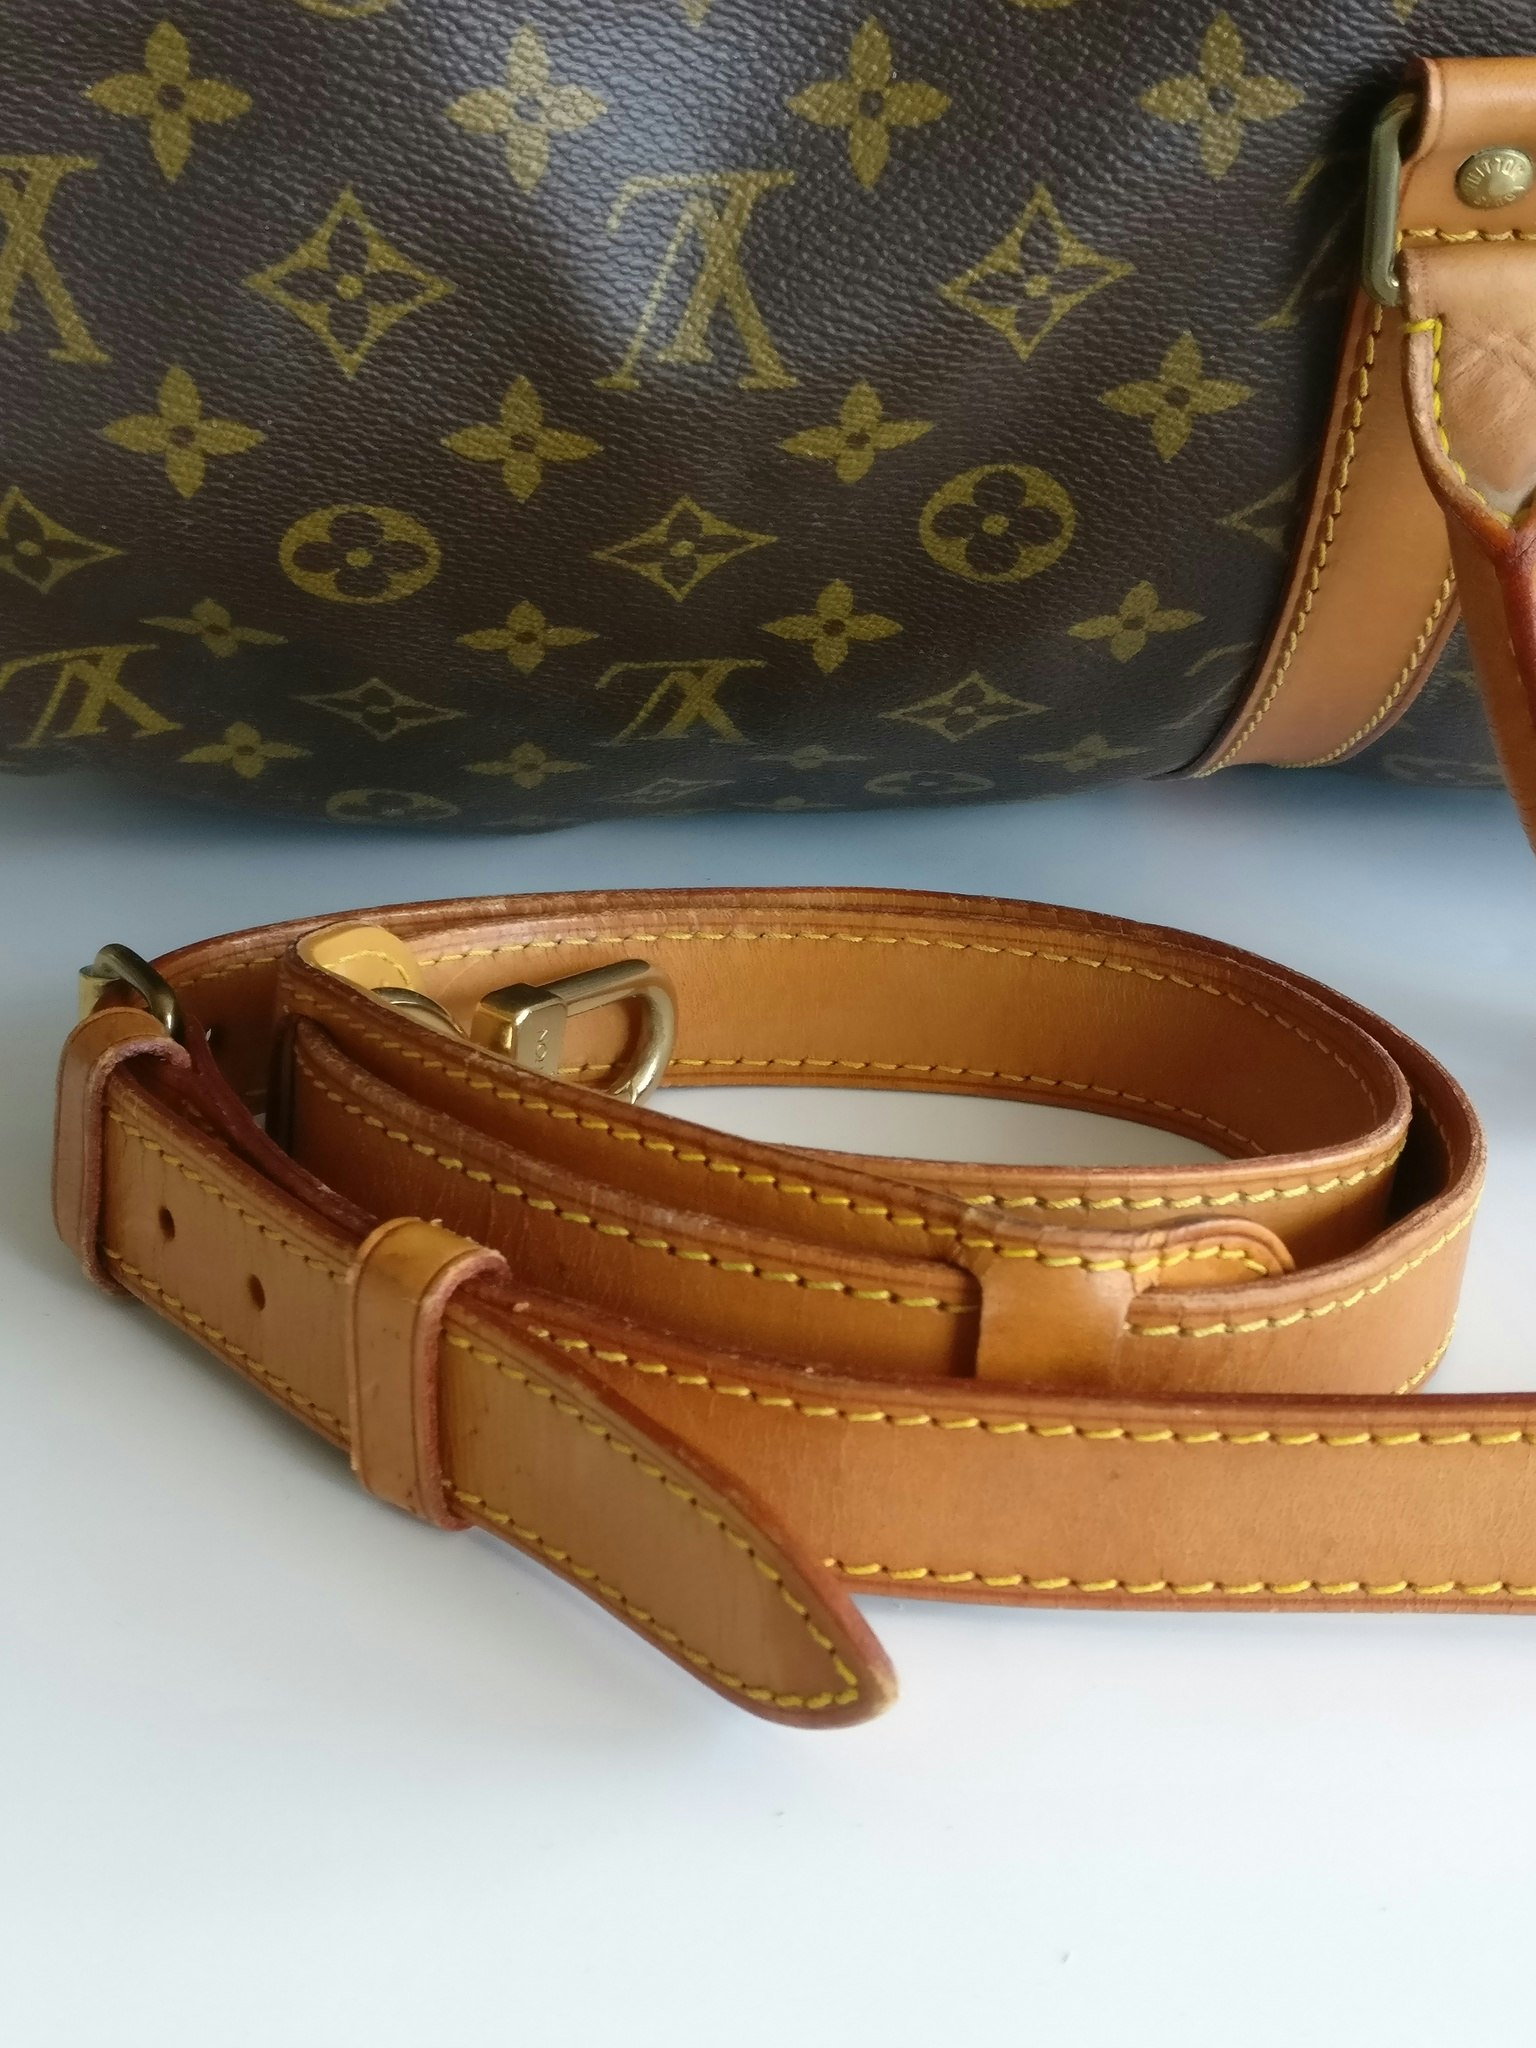 Charitybuzz: Louis Vuitton Mon Monogram Keepall 55 with Shoulder Strap